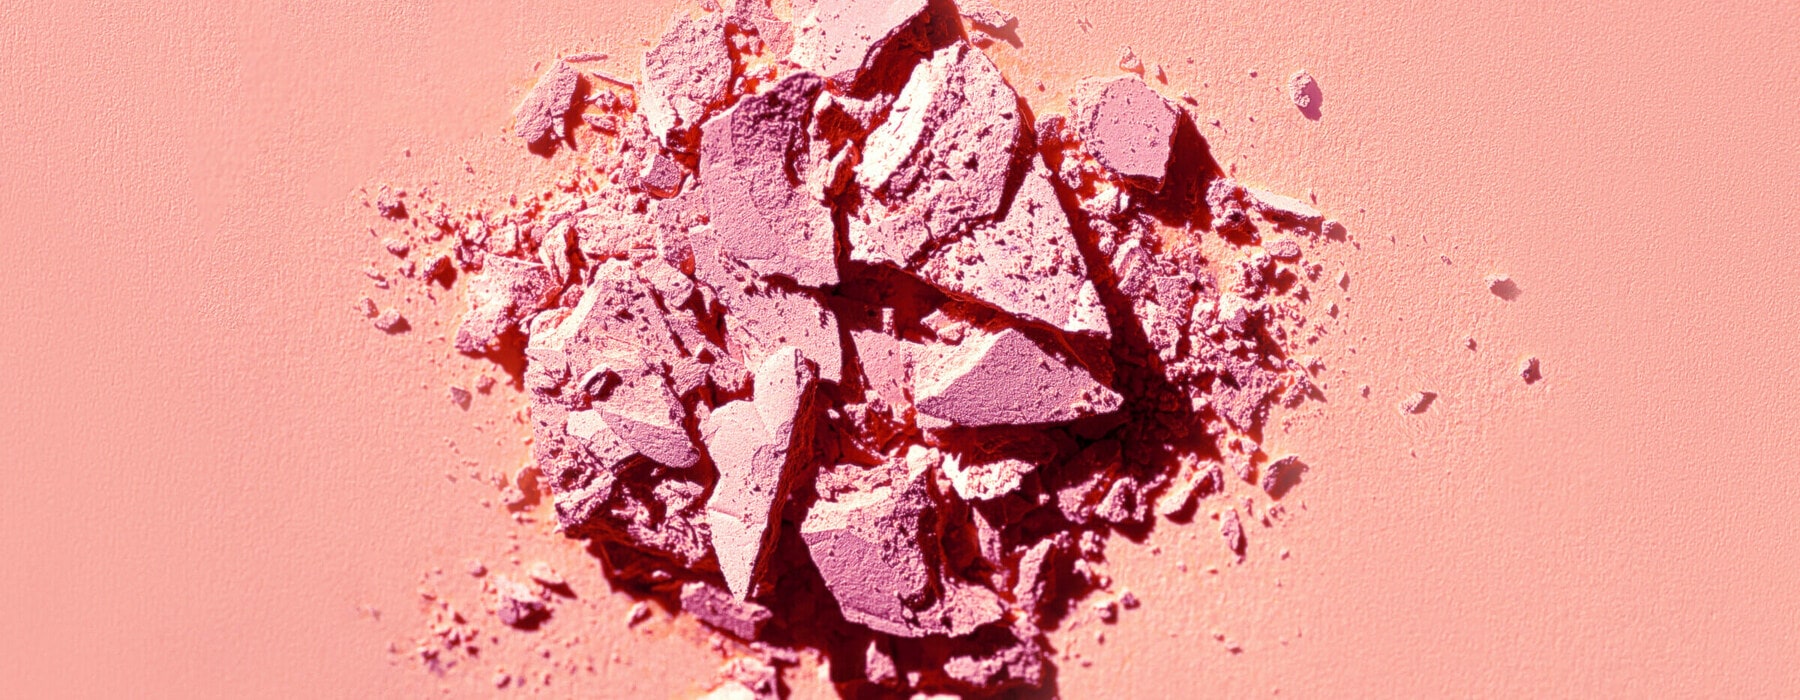 Eye shadow matte pink sand texture background. Beauty product in natural colours. Copy space, close up.